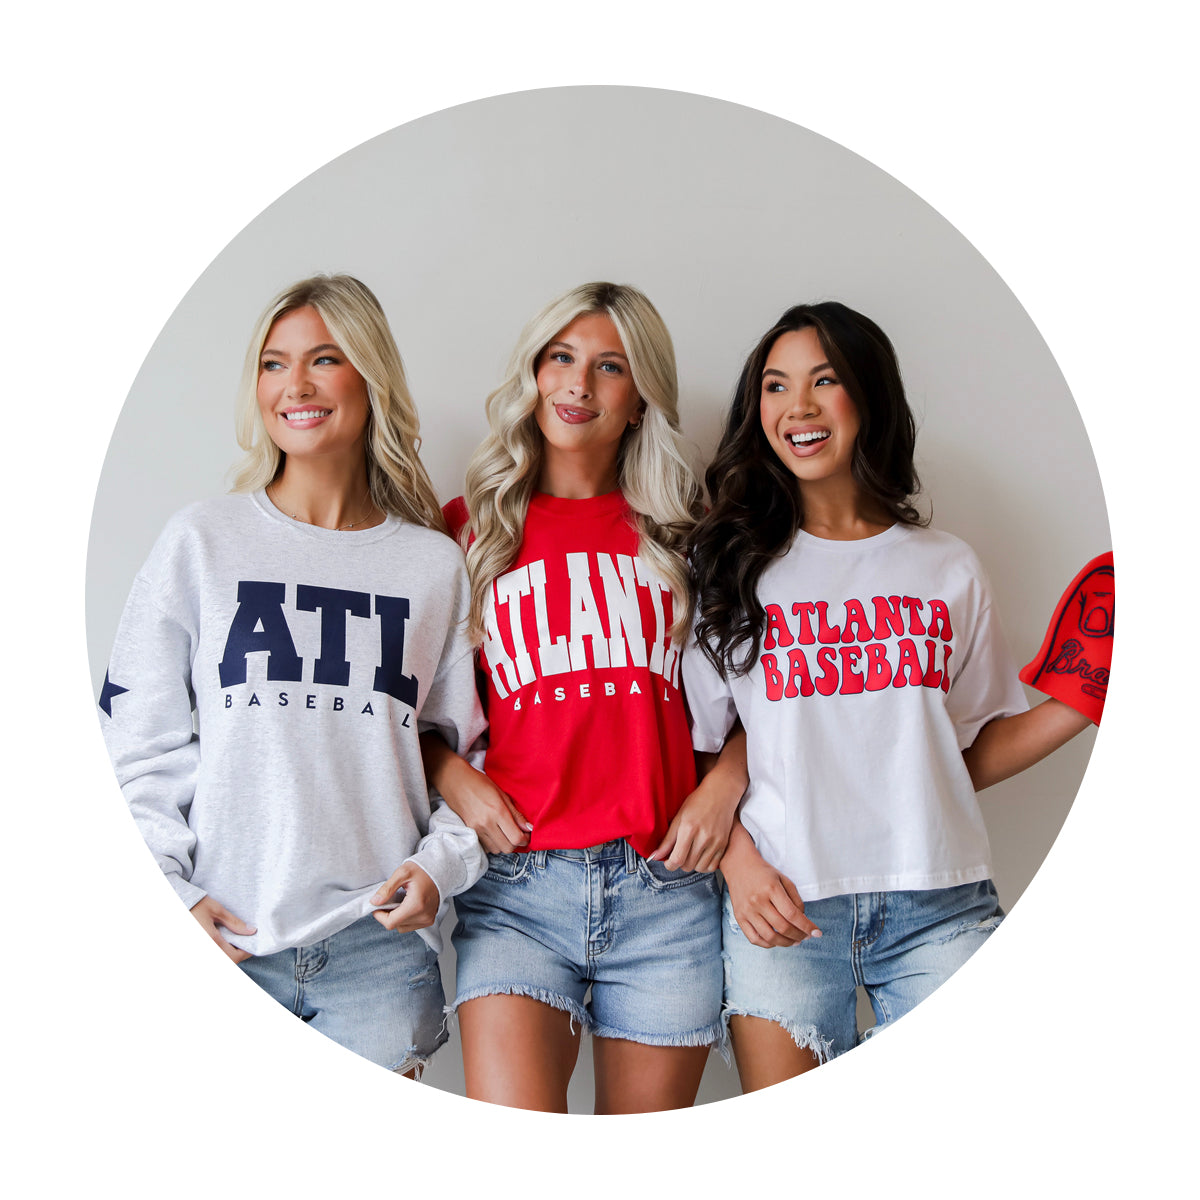 Baseball Game Outfit Ideas  Baseball game outfits, Atlanta braves outfit,  Gameday outfit